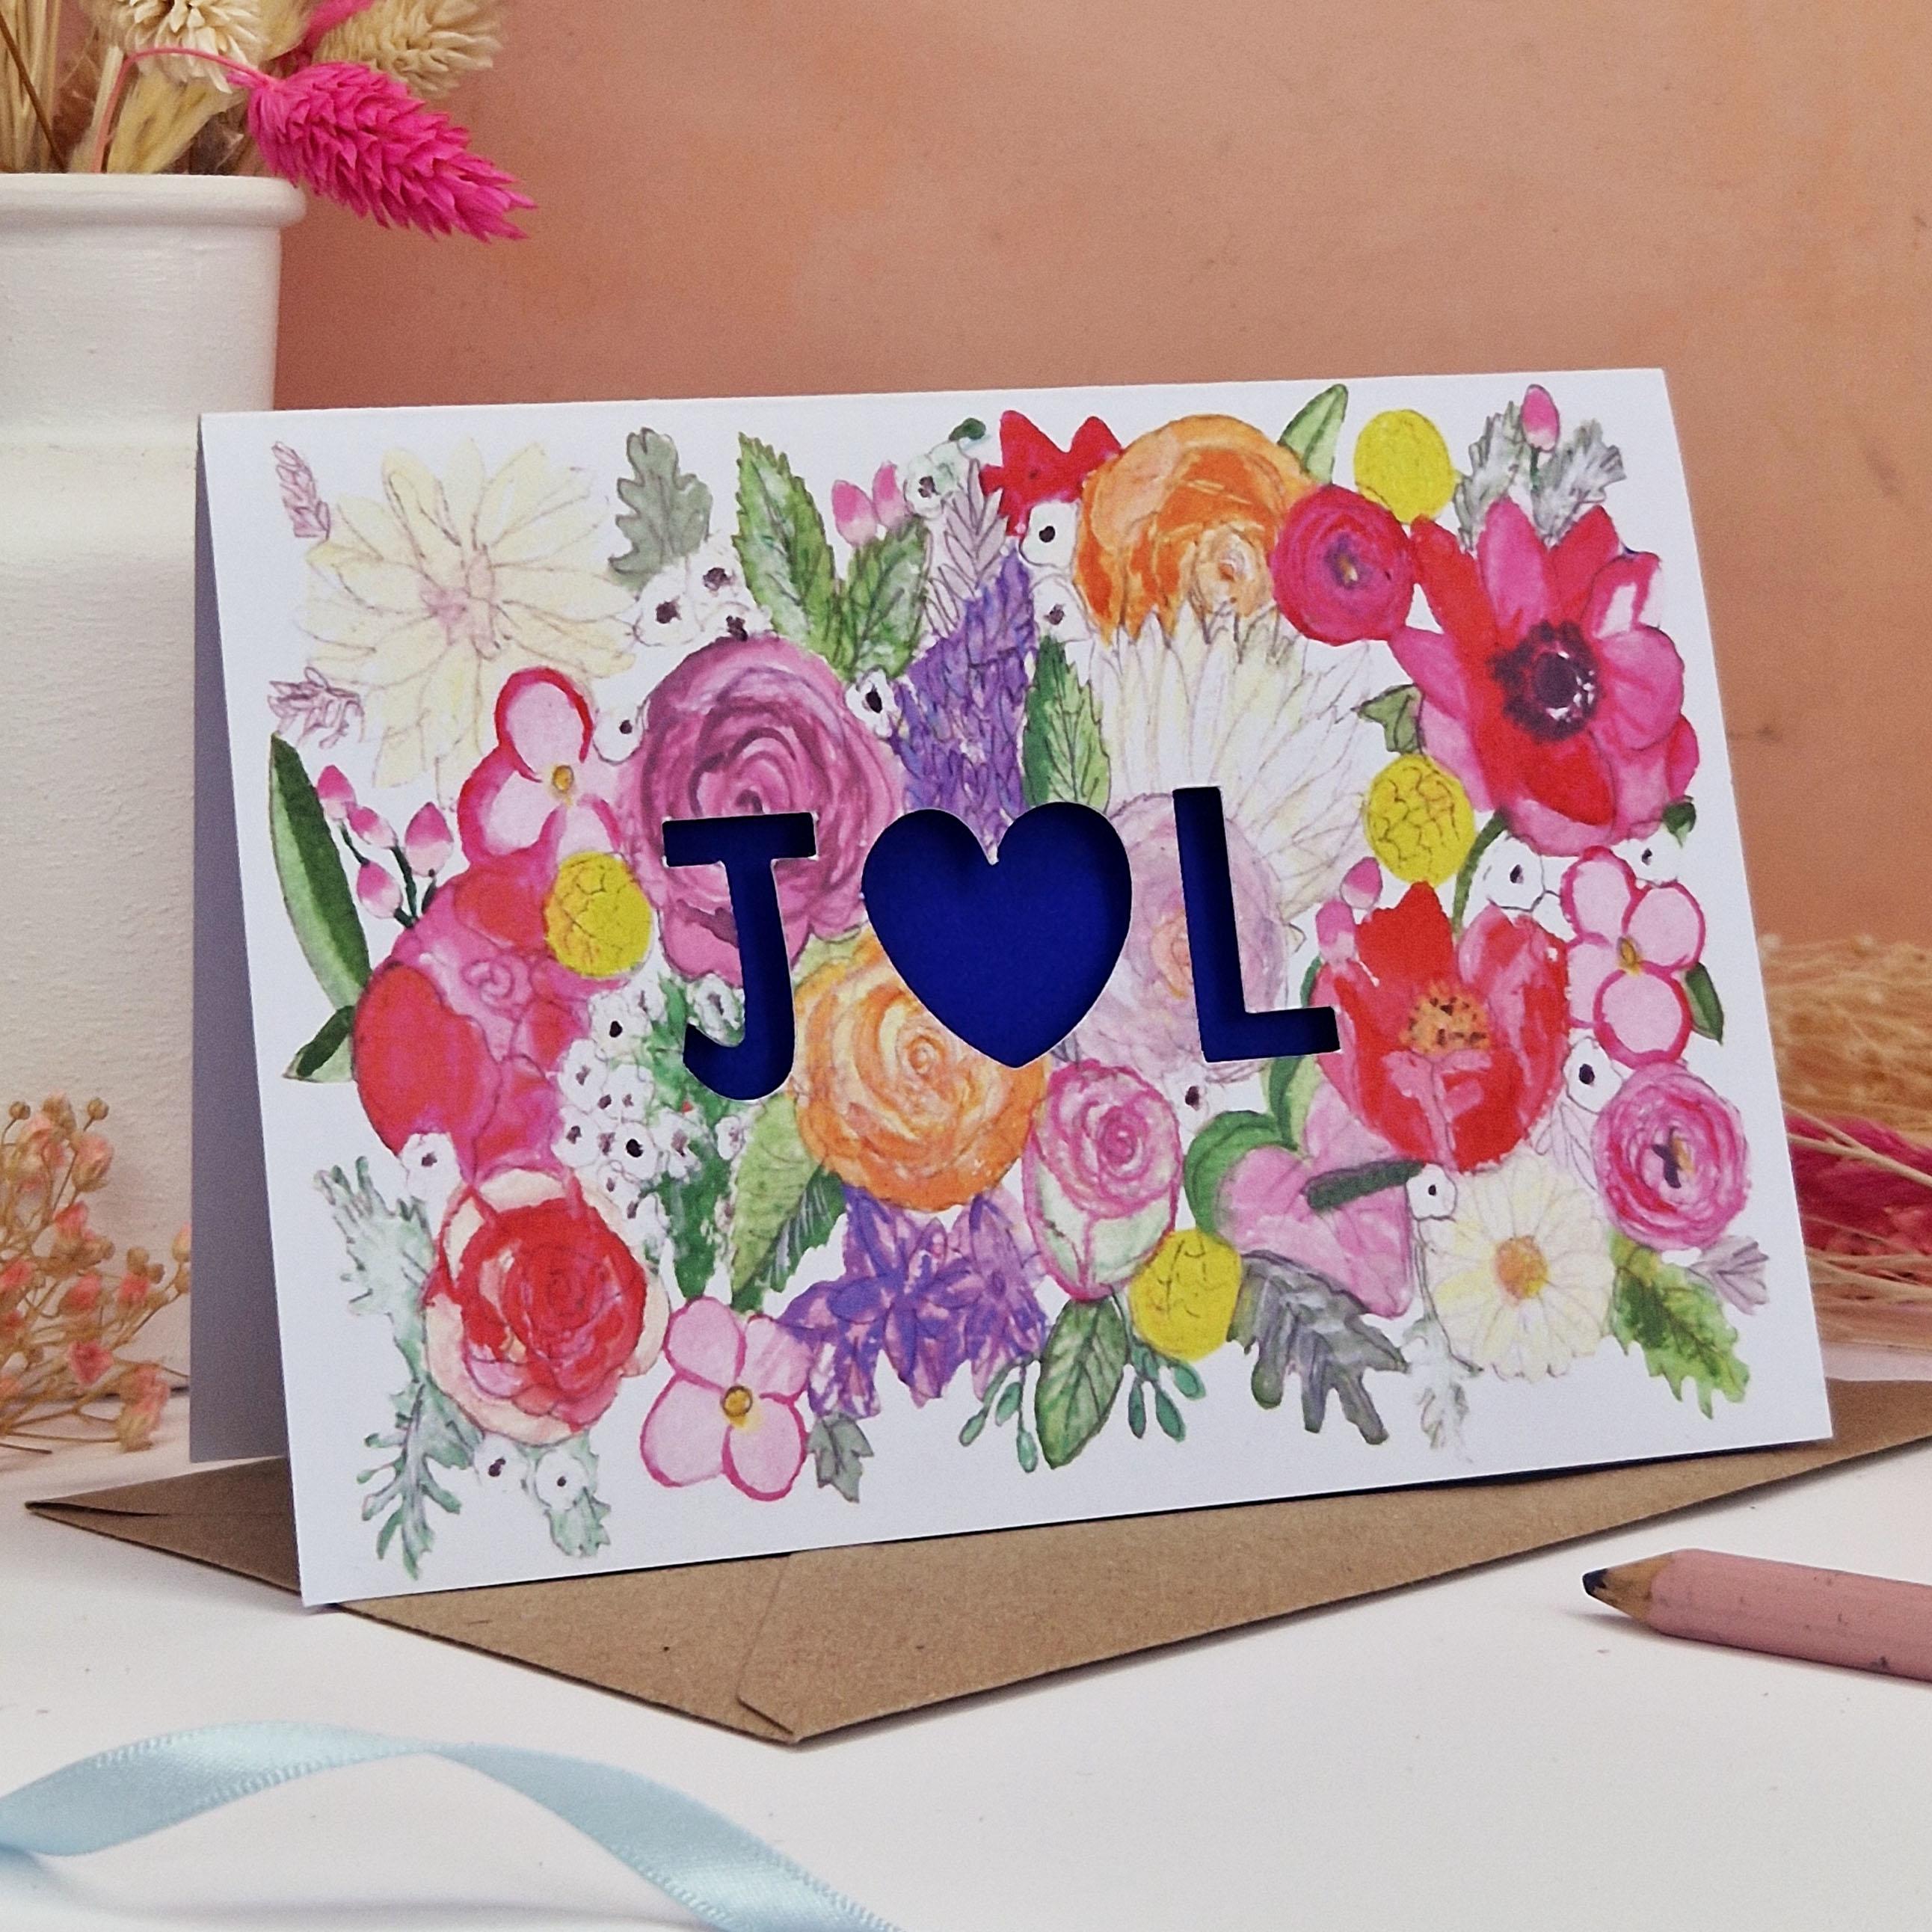 Floral Card with Paper cut text that is personalised with Initials with bright floral background and blue paper liner inside.